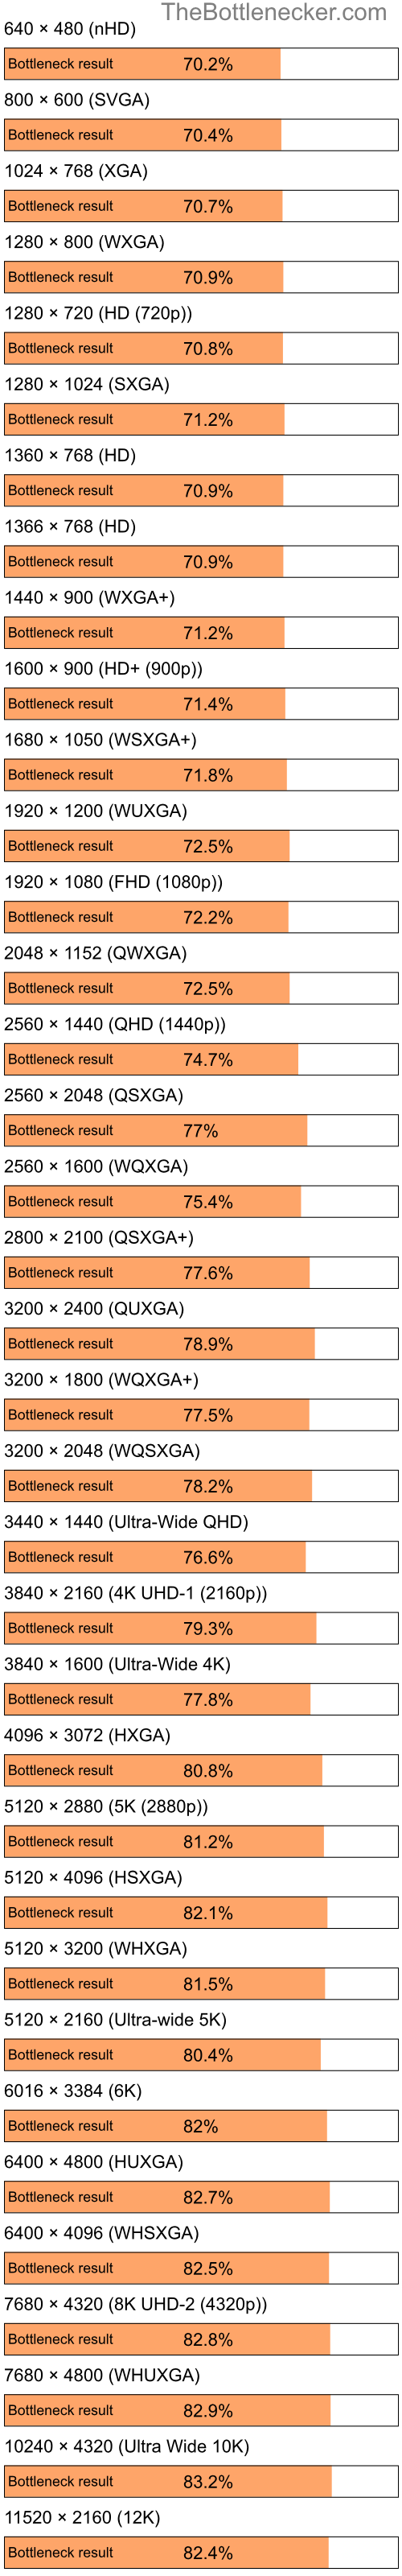 Bottleneck results by resolution for Intel Celeron M 410 and NVIDIA GeForce 6700 XL in Graphic Card Intense Tasks